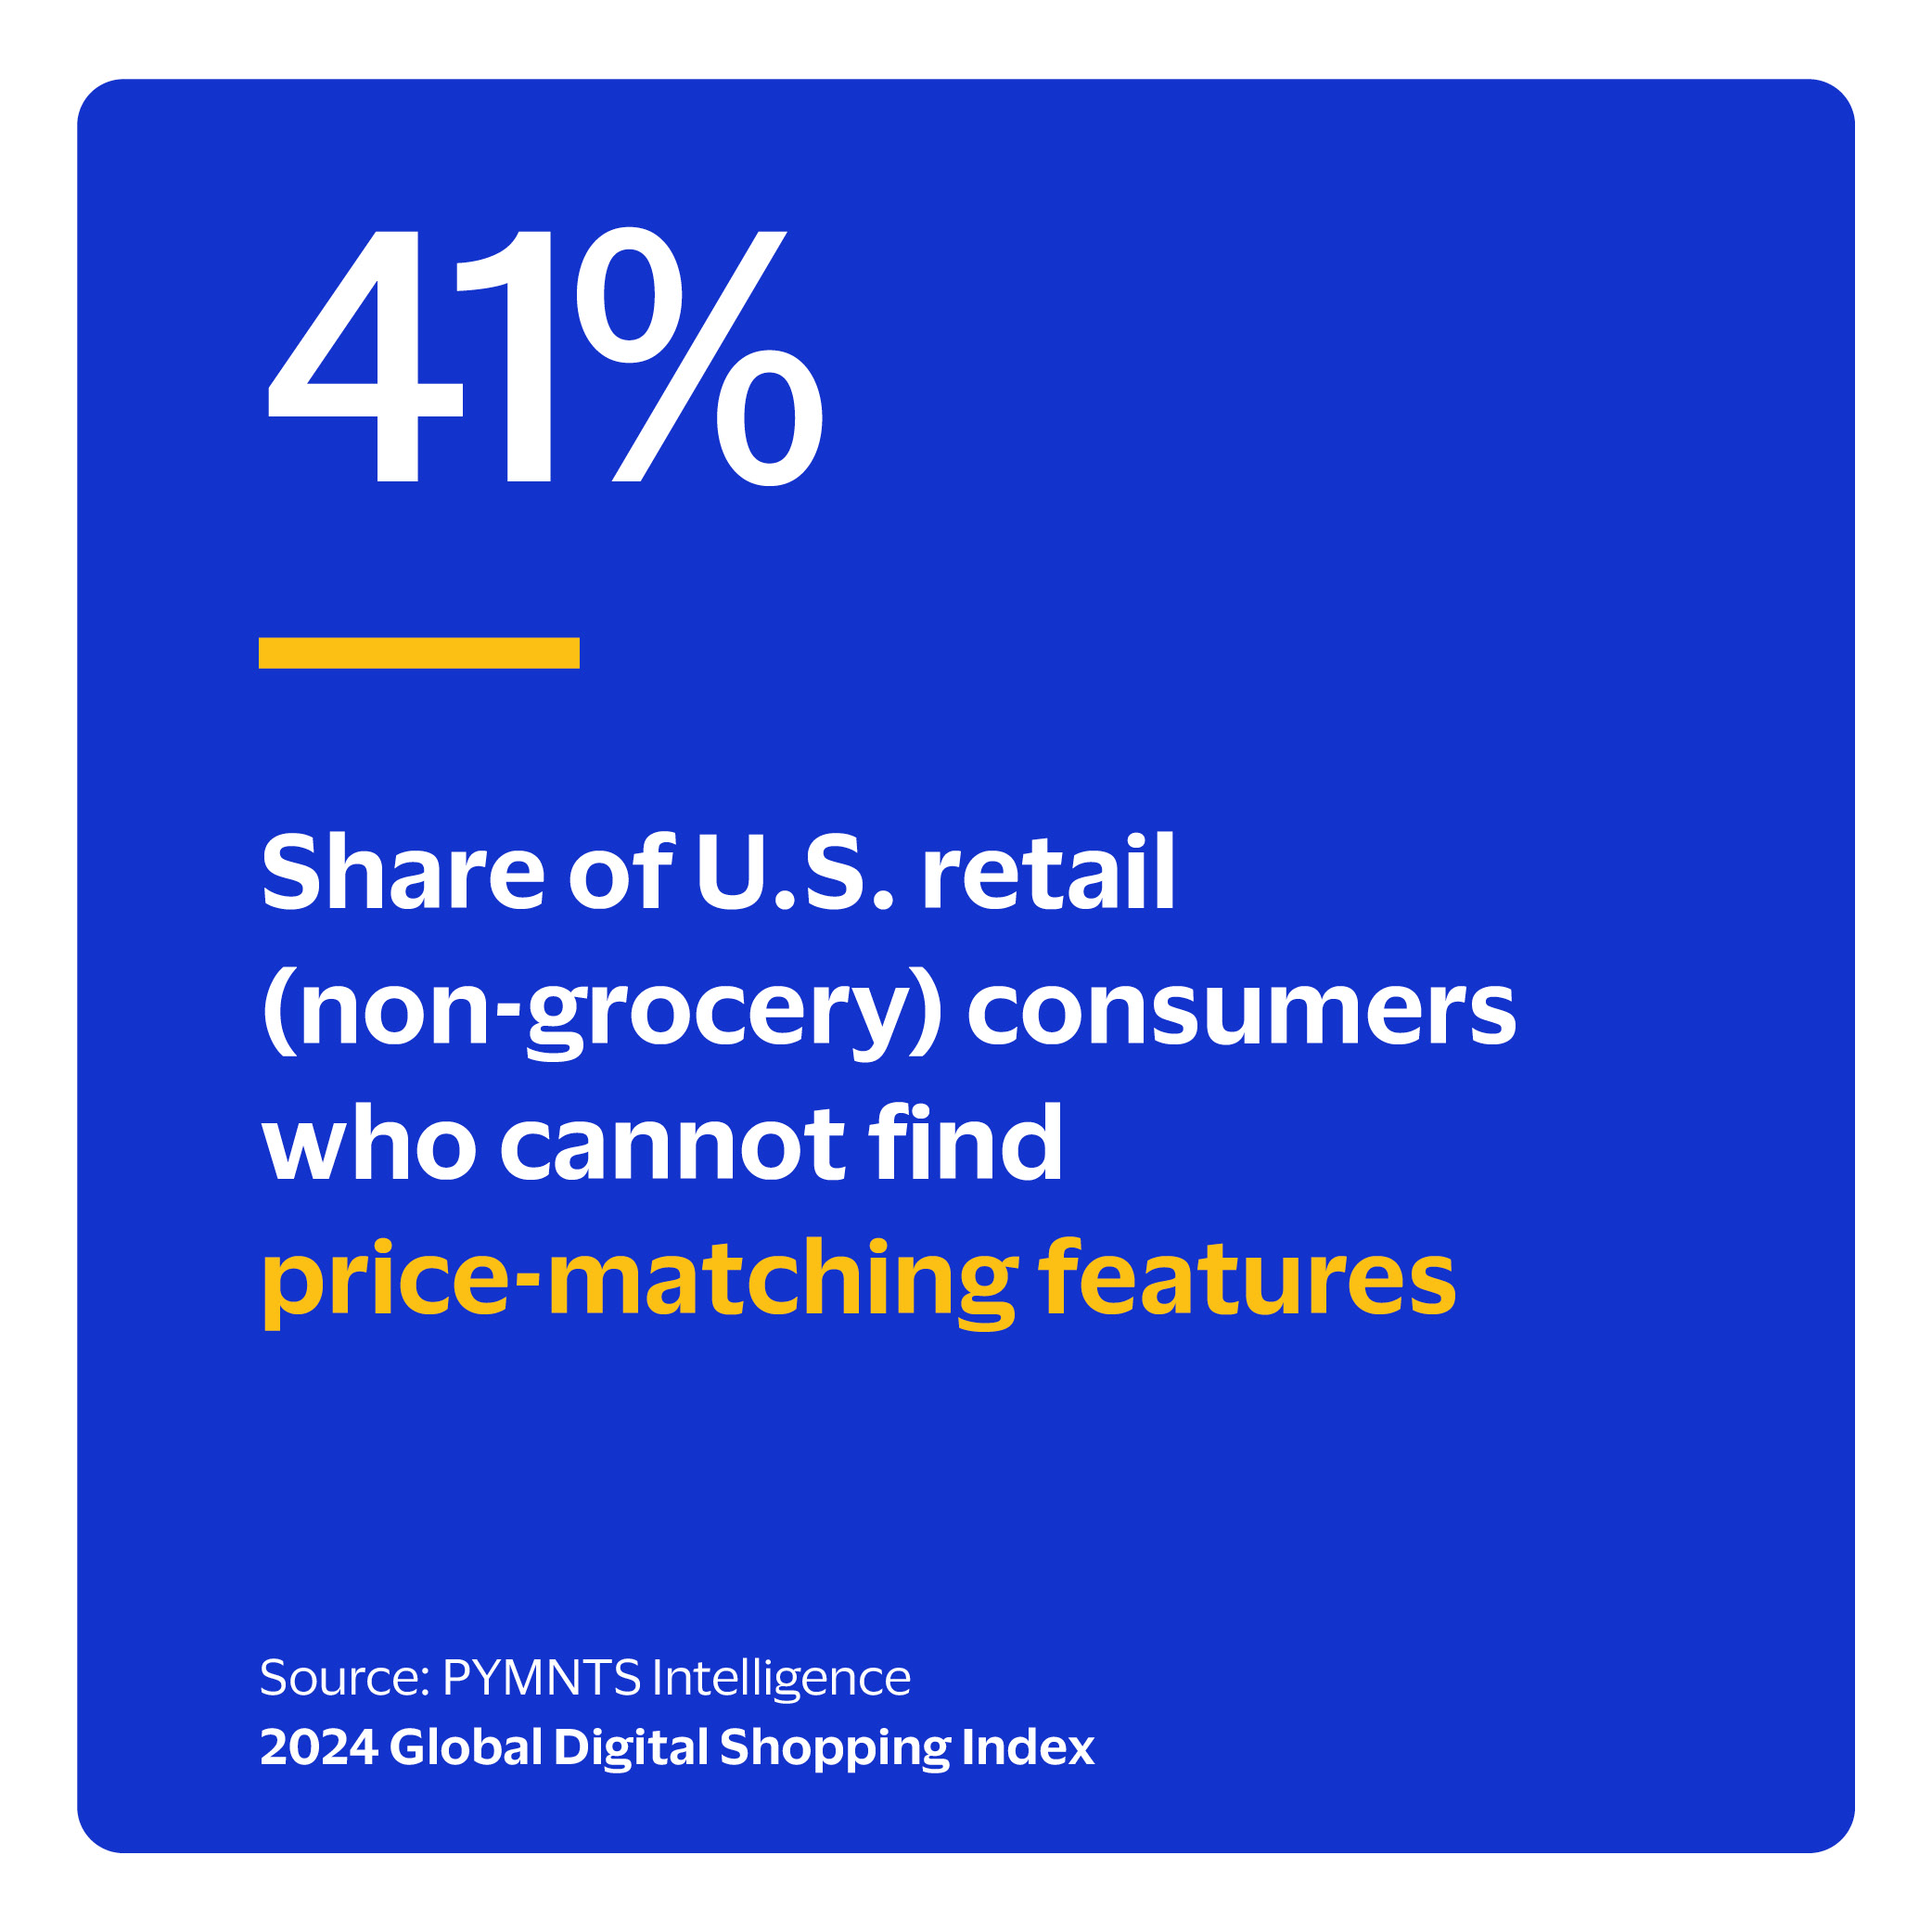 41%: Share of U.S. retail (non-grocery) consumers who cannot find price-matching features